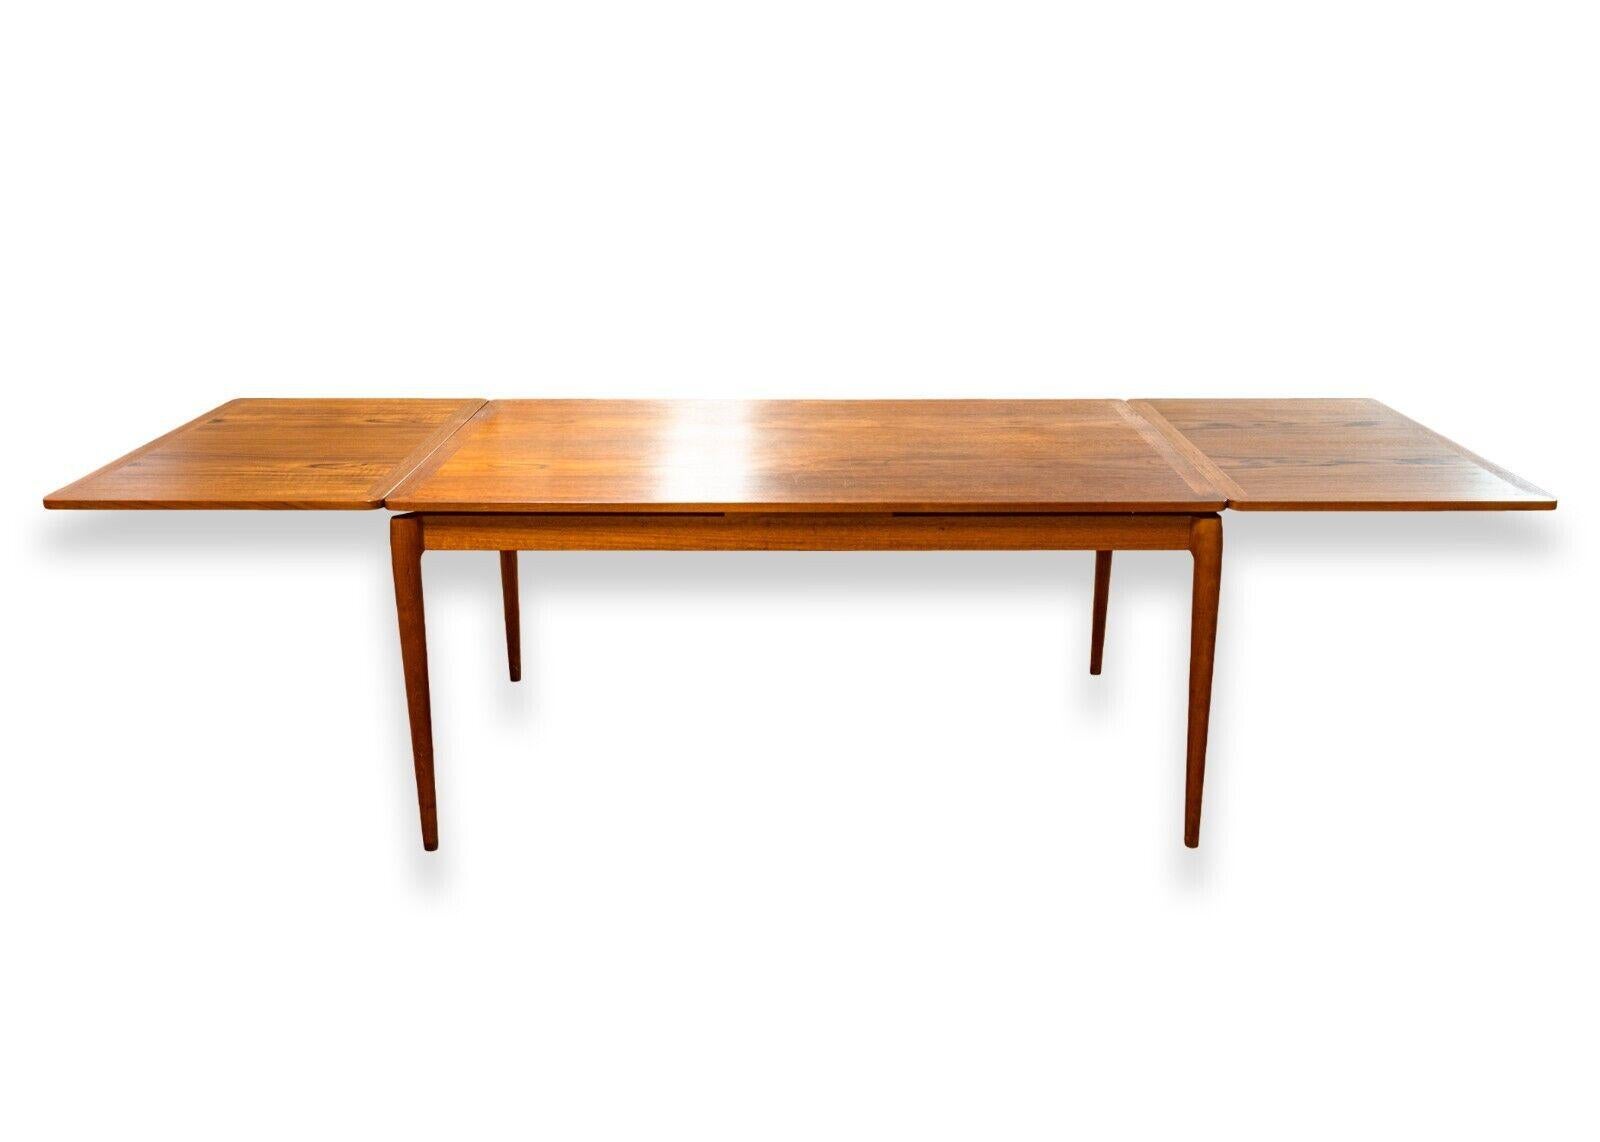 A Heltborg Mobler Domus Danica Danish mid century modern rosewood extendable dining room table. This is an absolutely stunning dining room table with classic and timeless Danish design. This piece features a vintage and rare rosewood construction